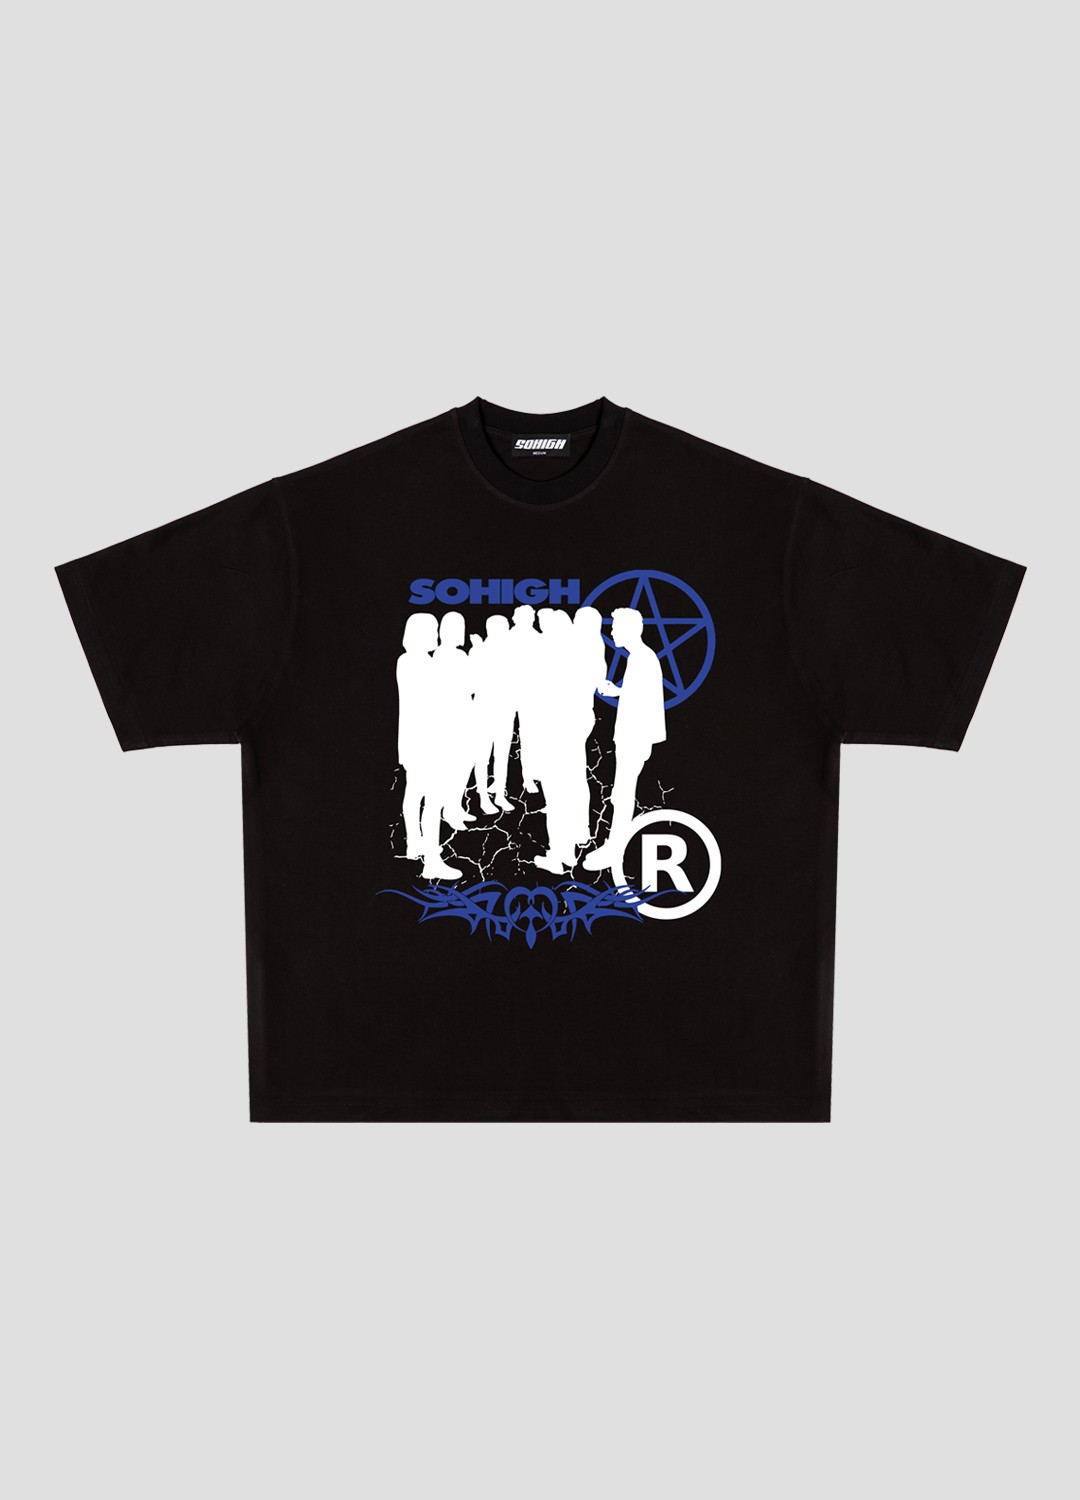 Sohigh People Archive T-Shirt (SHT-17)